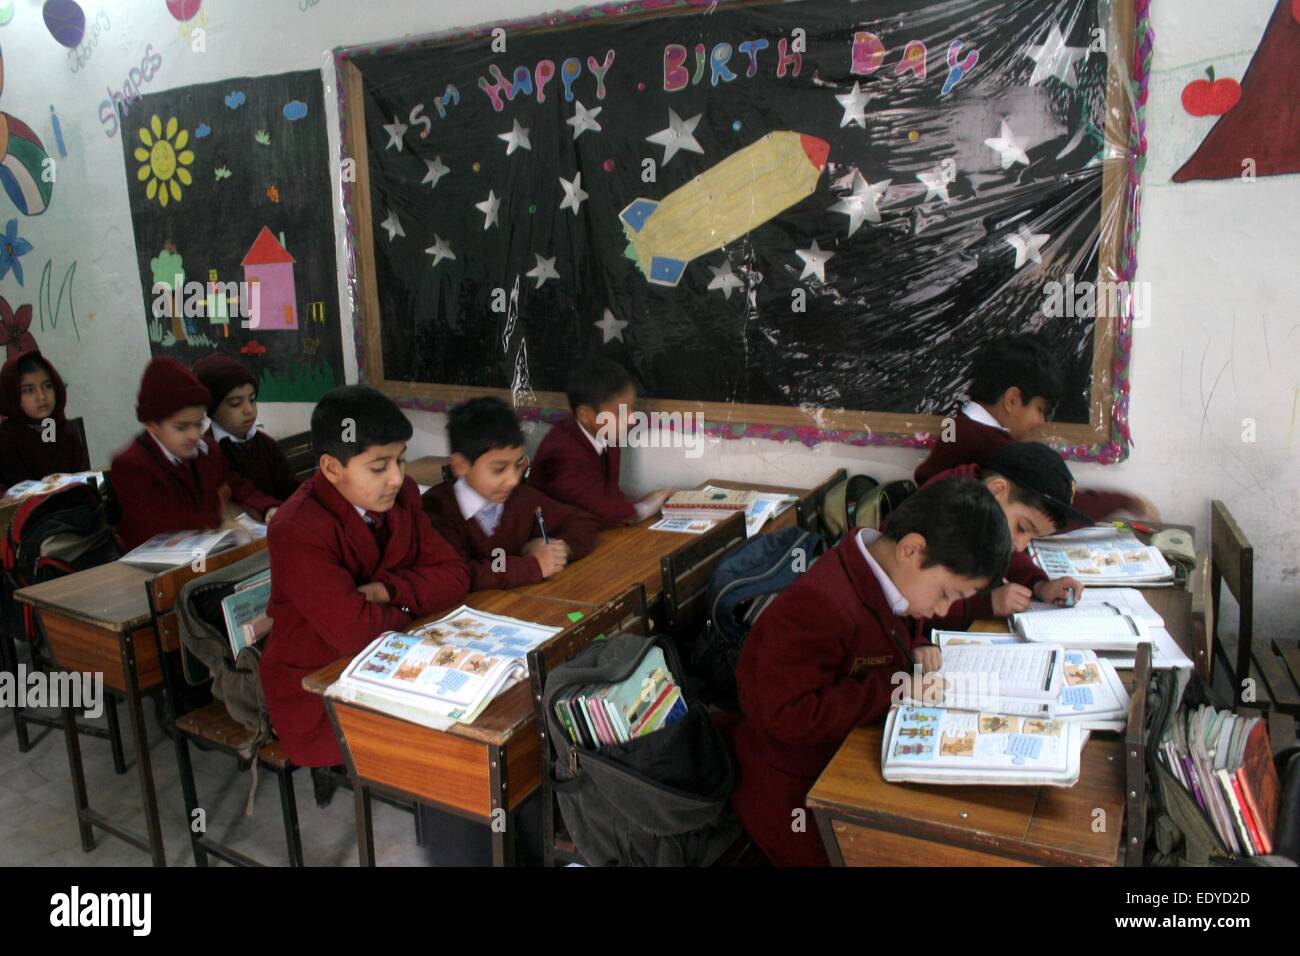 Peshawar. 12th Jan, 2015. Pakistani students attend class at a school in northwest Pakistan's Peshawar, Jan. 12, 2015. Schools in Pakistan's northwestern city of Peshawar reopened on Monday after a Taliban raid massacred 150 people, mainly children. © Ahmad Sidique/Xinhua/Alamy Live News Stock Photo